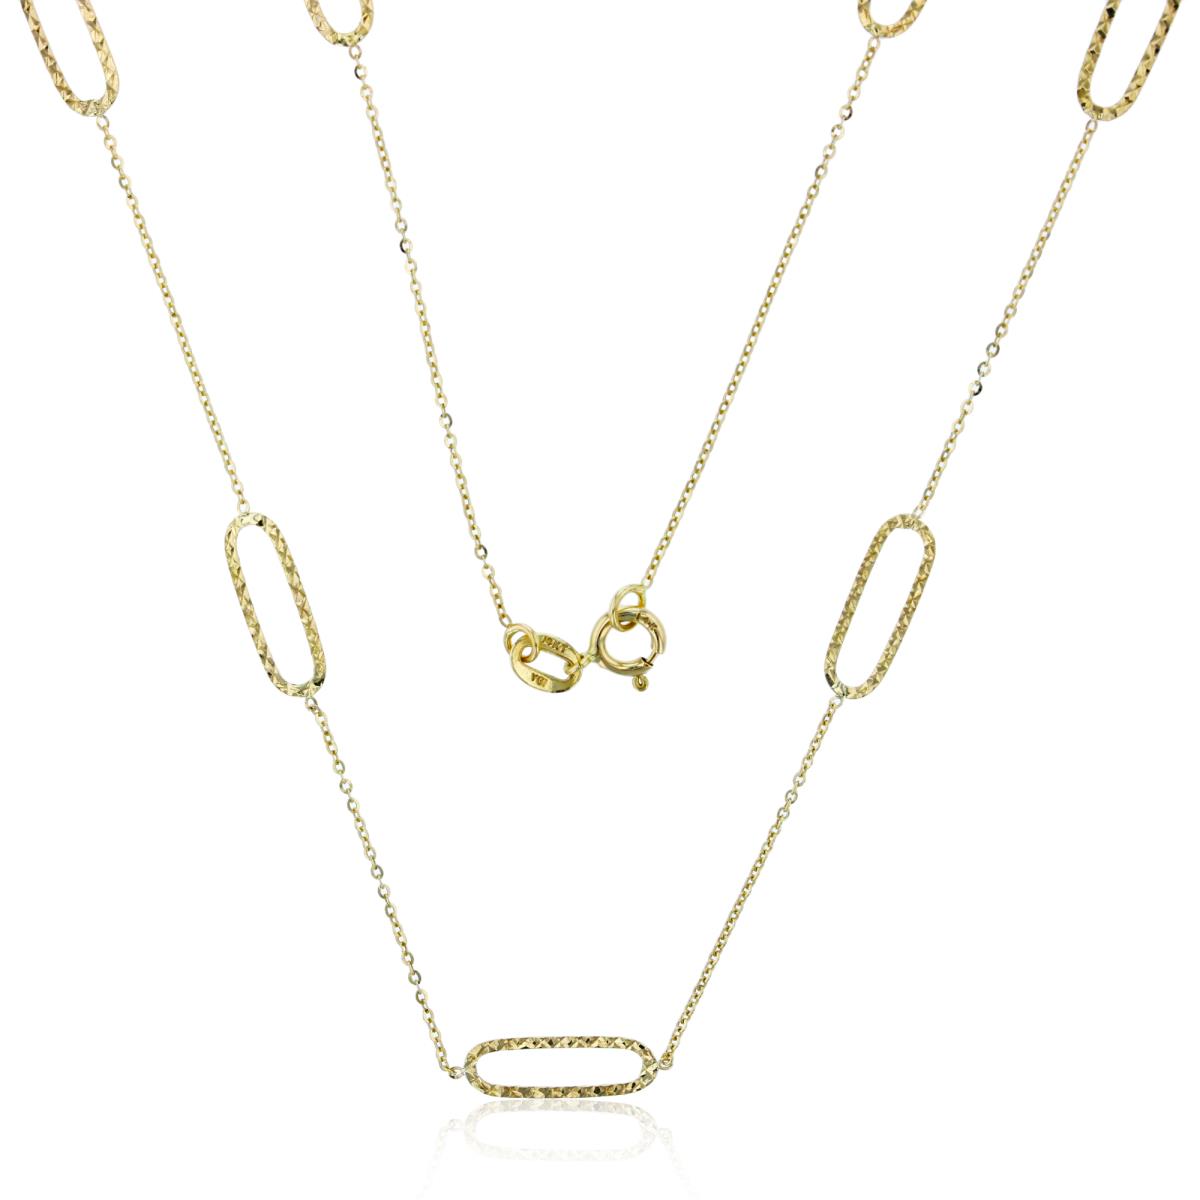 10K Yellow Gold Diamond Cut Open Oval Links 18" Necklace